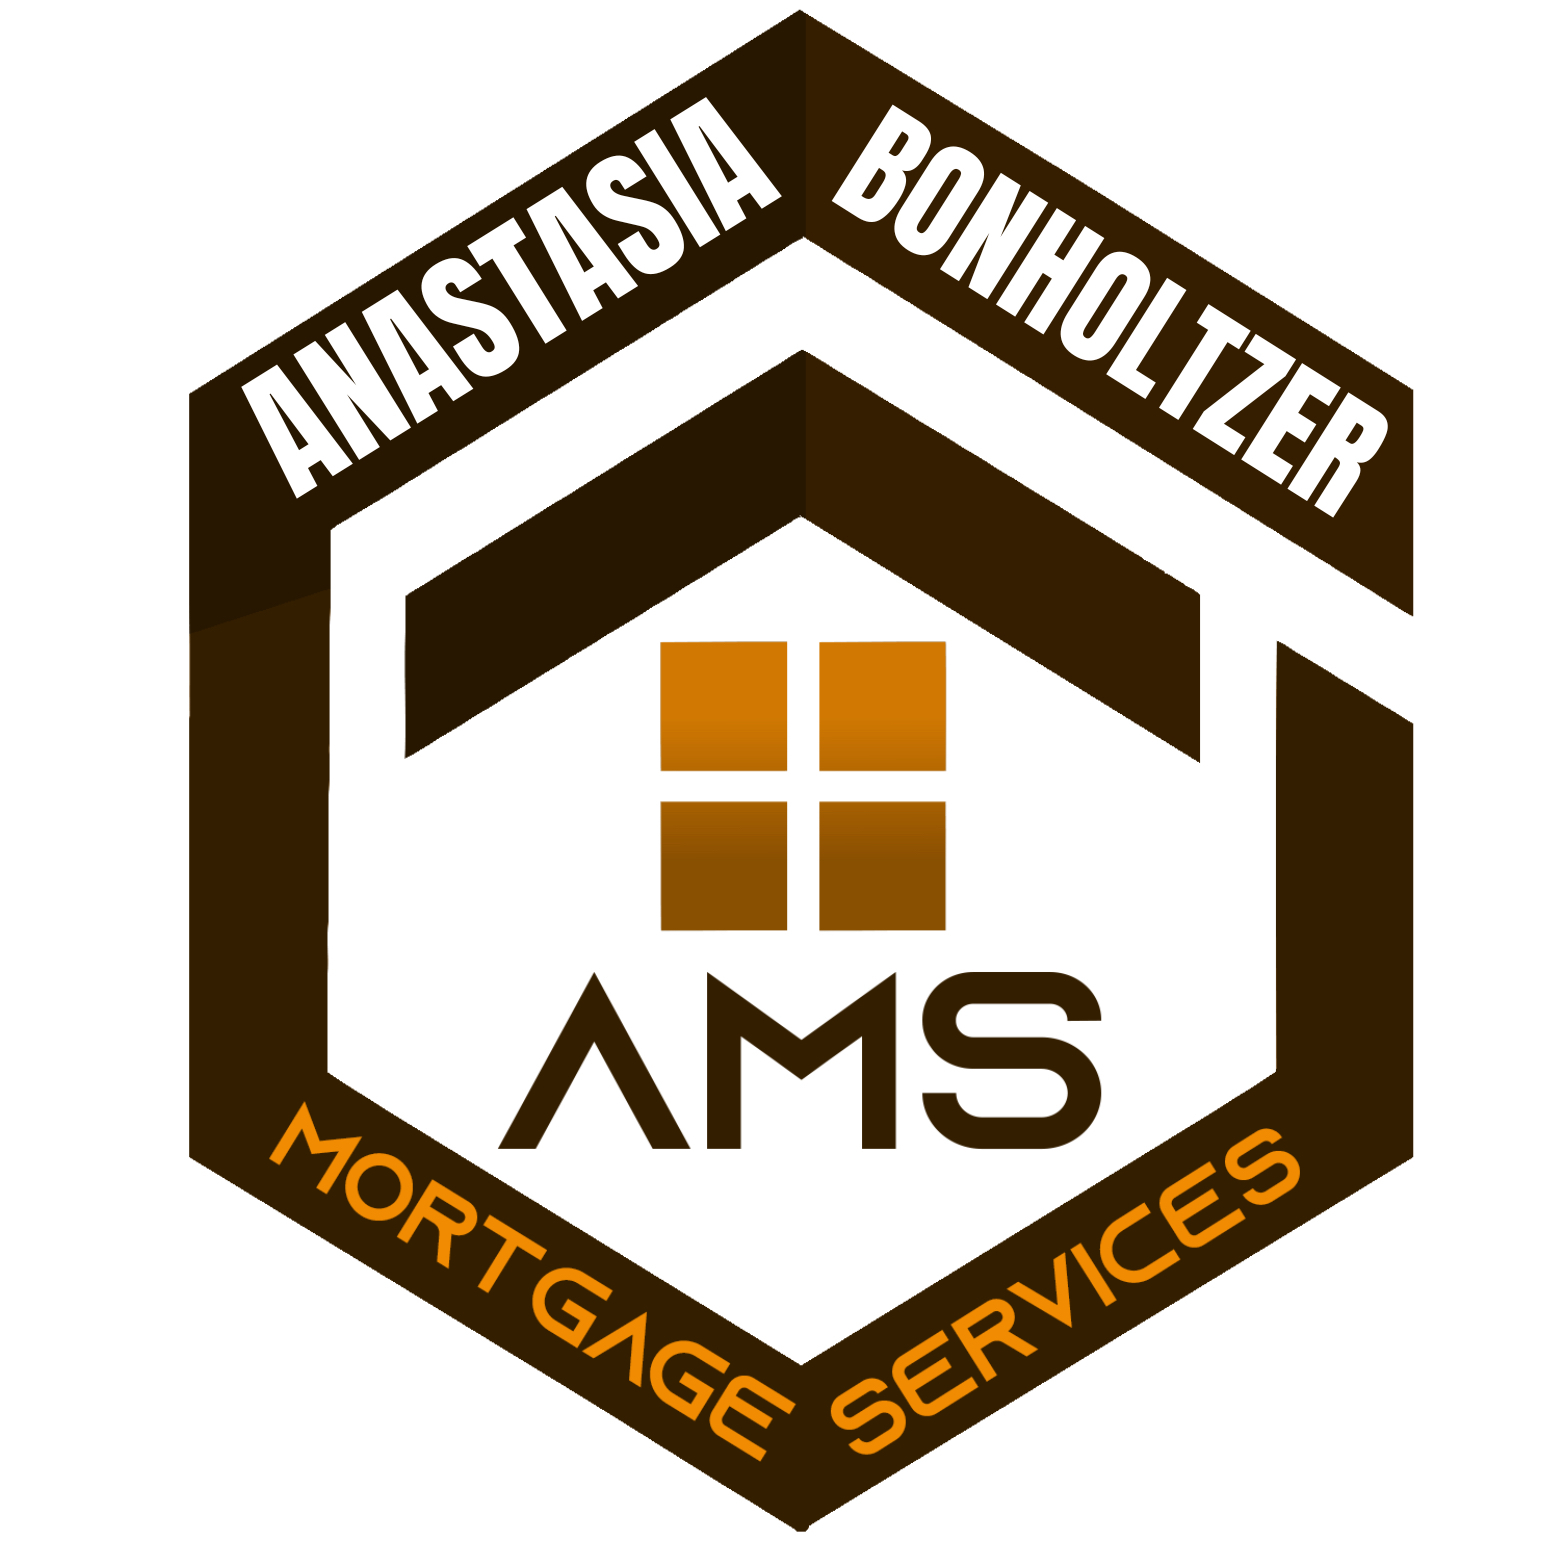 A-M-S Mortgage Services, Inc.